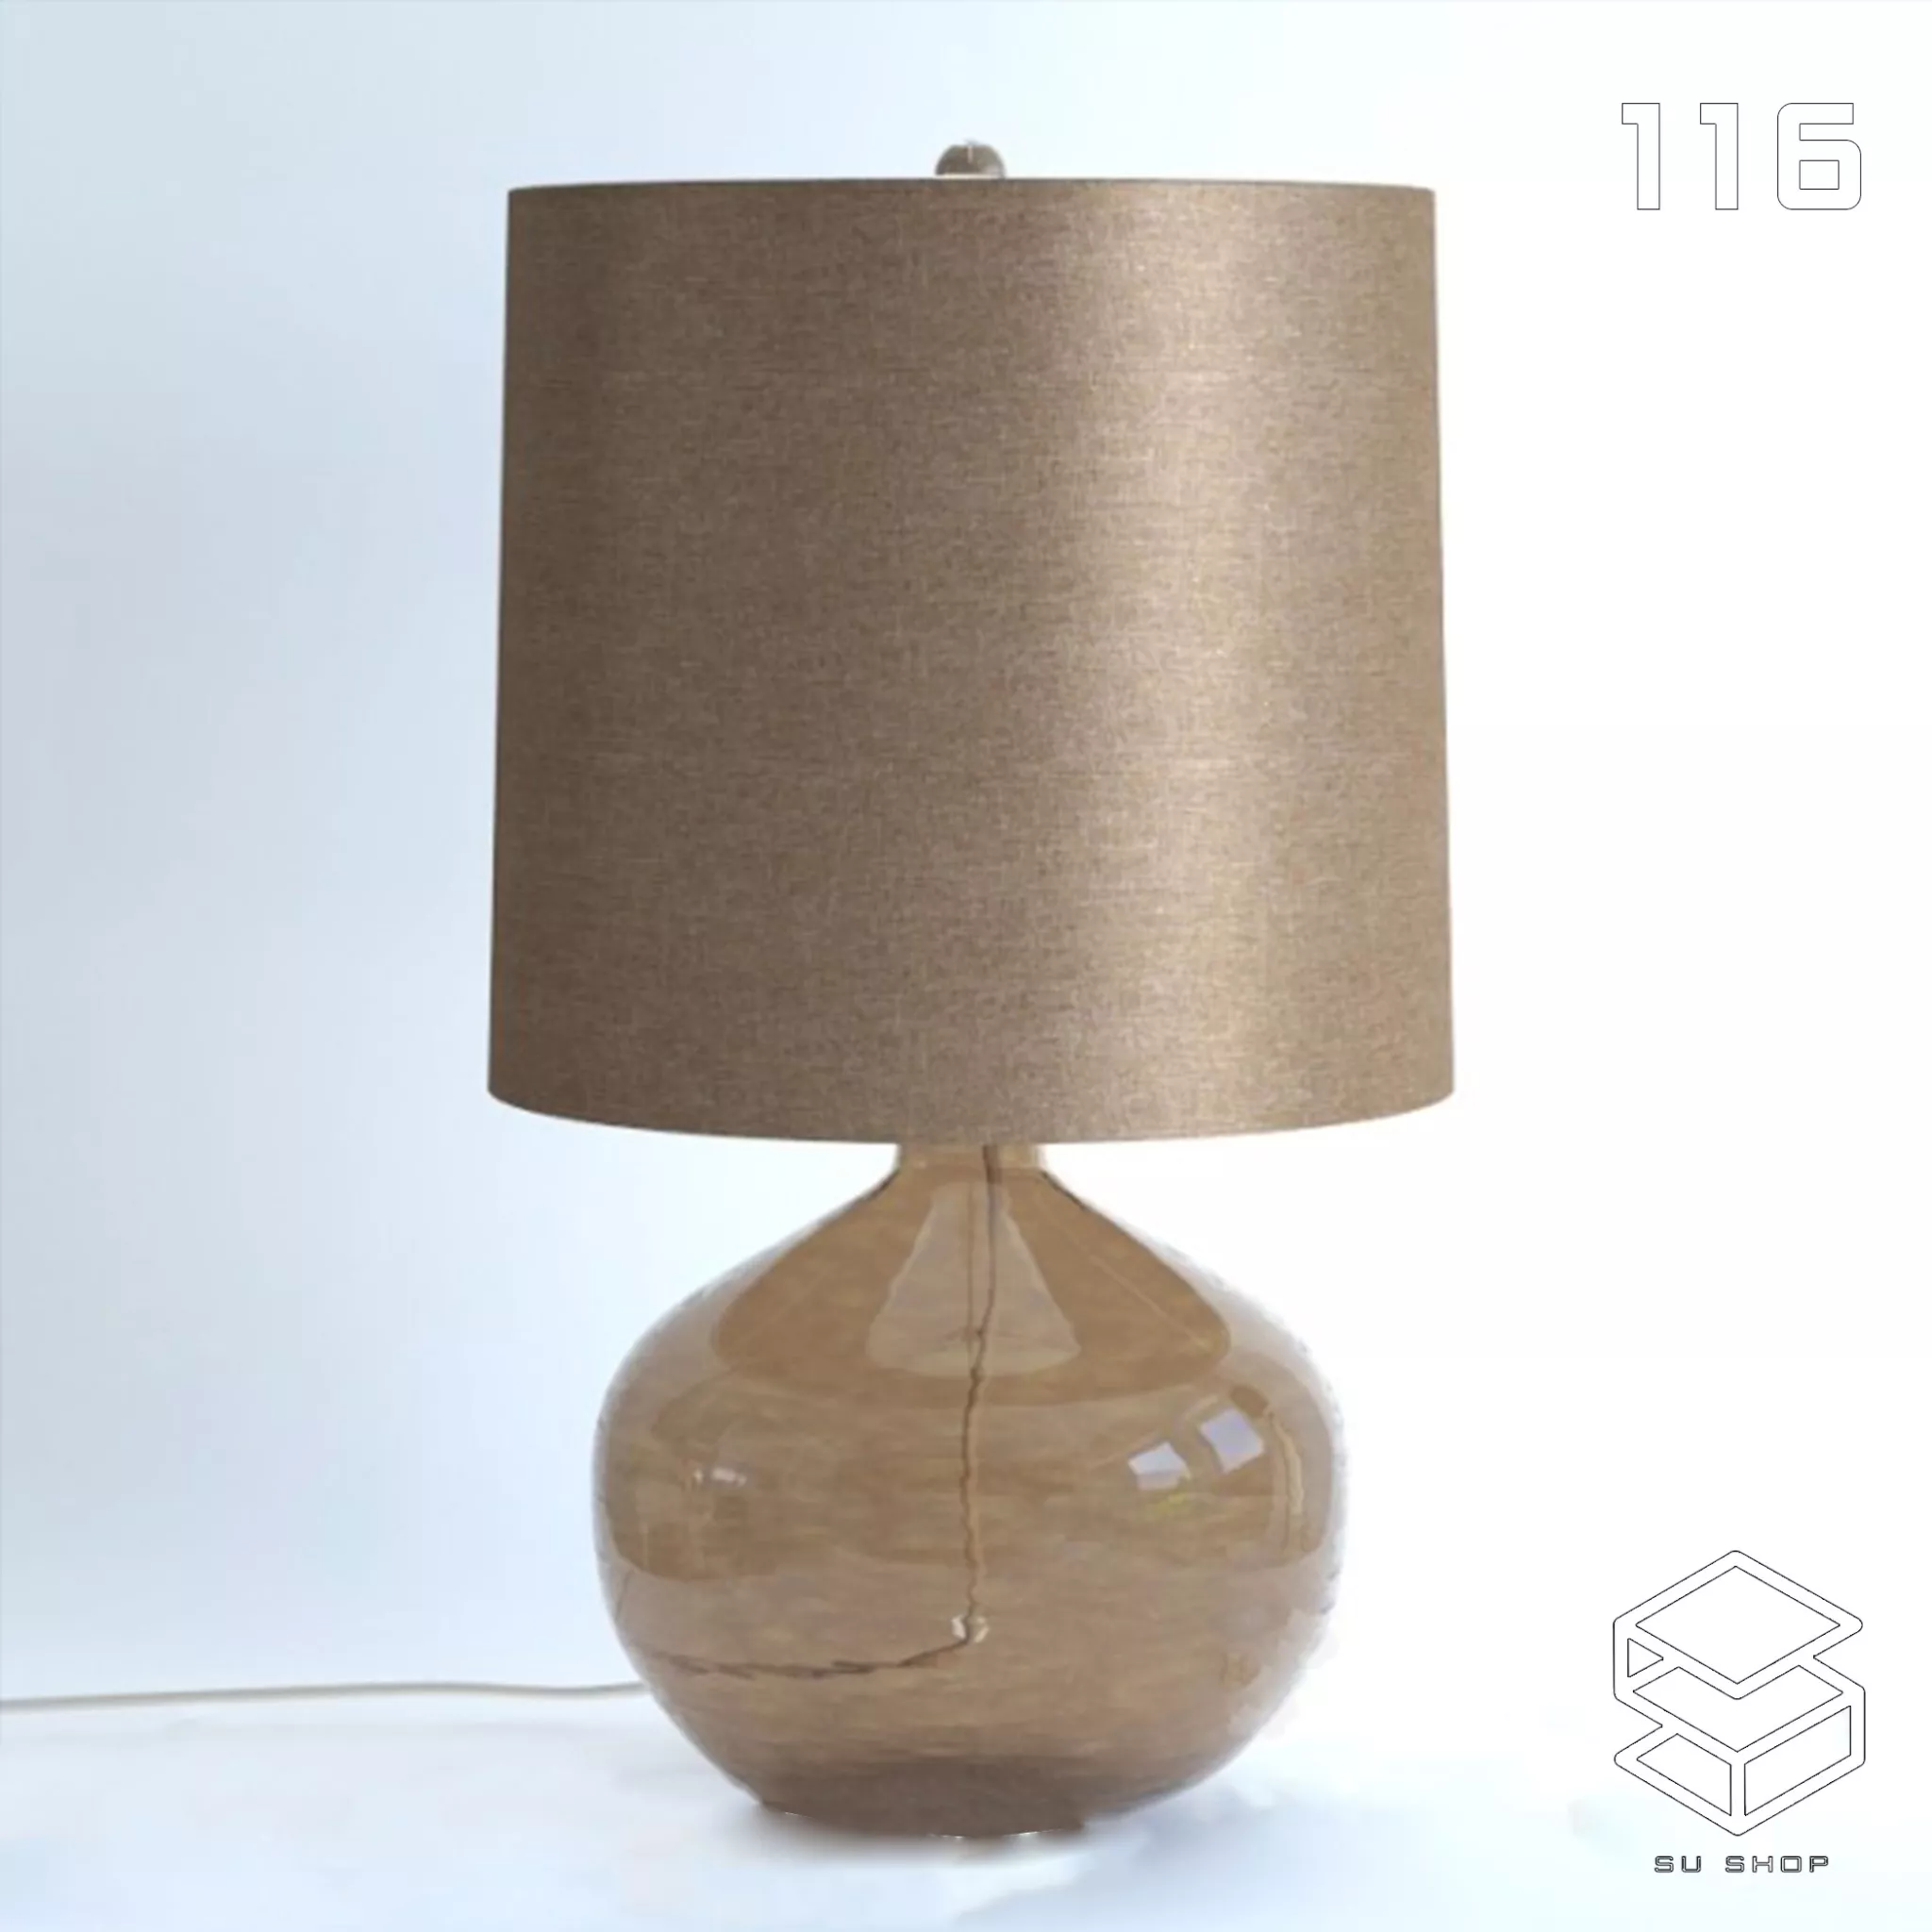 MODERN TABLE LAMP - SKETCHUP 3D MODEL - VRAY OR ENSCAPE - ID14682